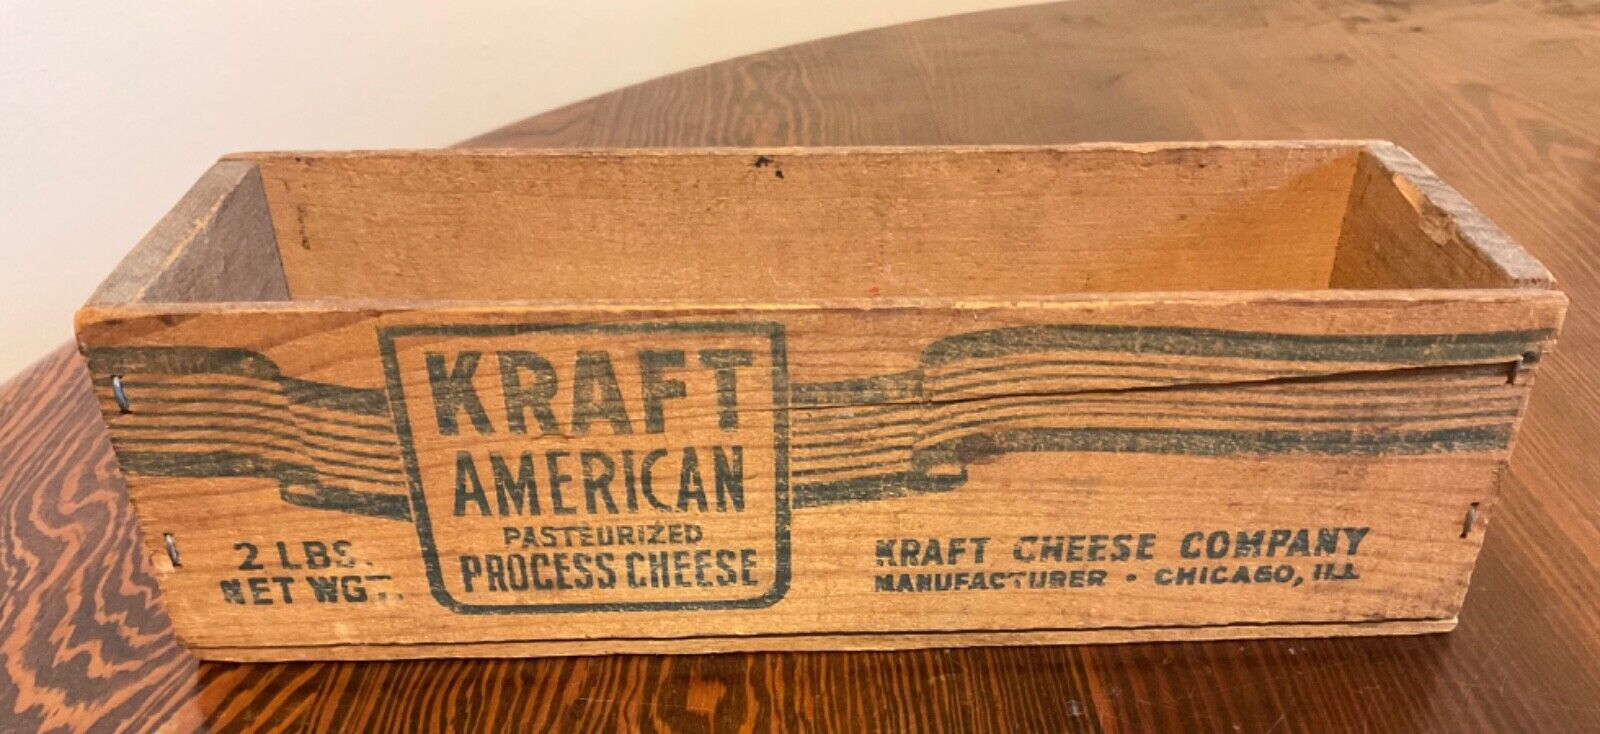 Antique Kraft American Cheese Wooden Box 2 lbs Chicago IL No Lid  